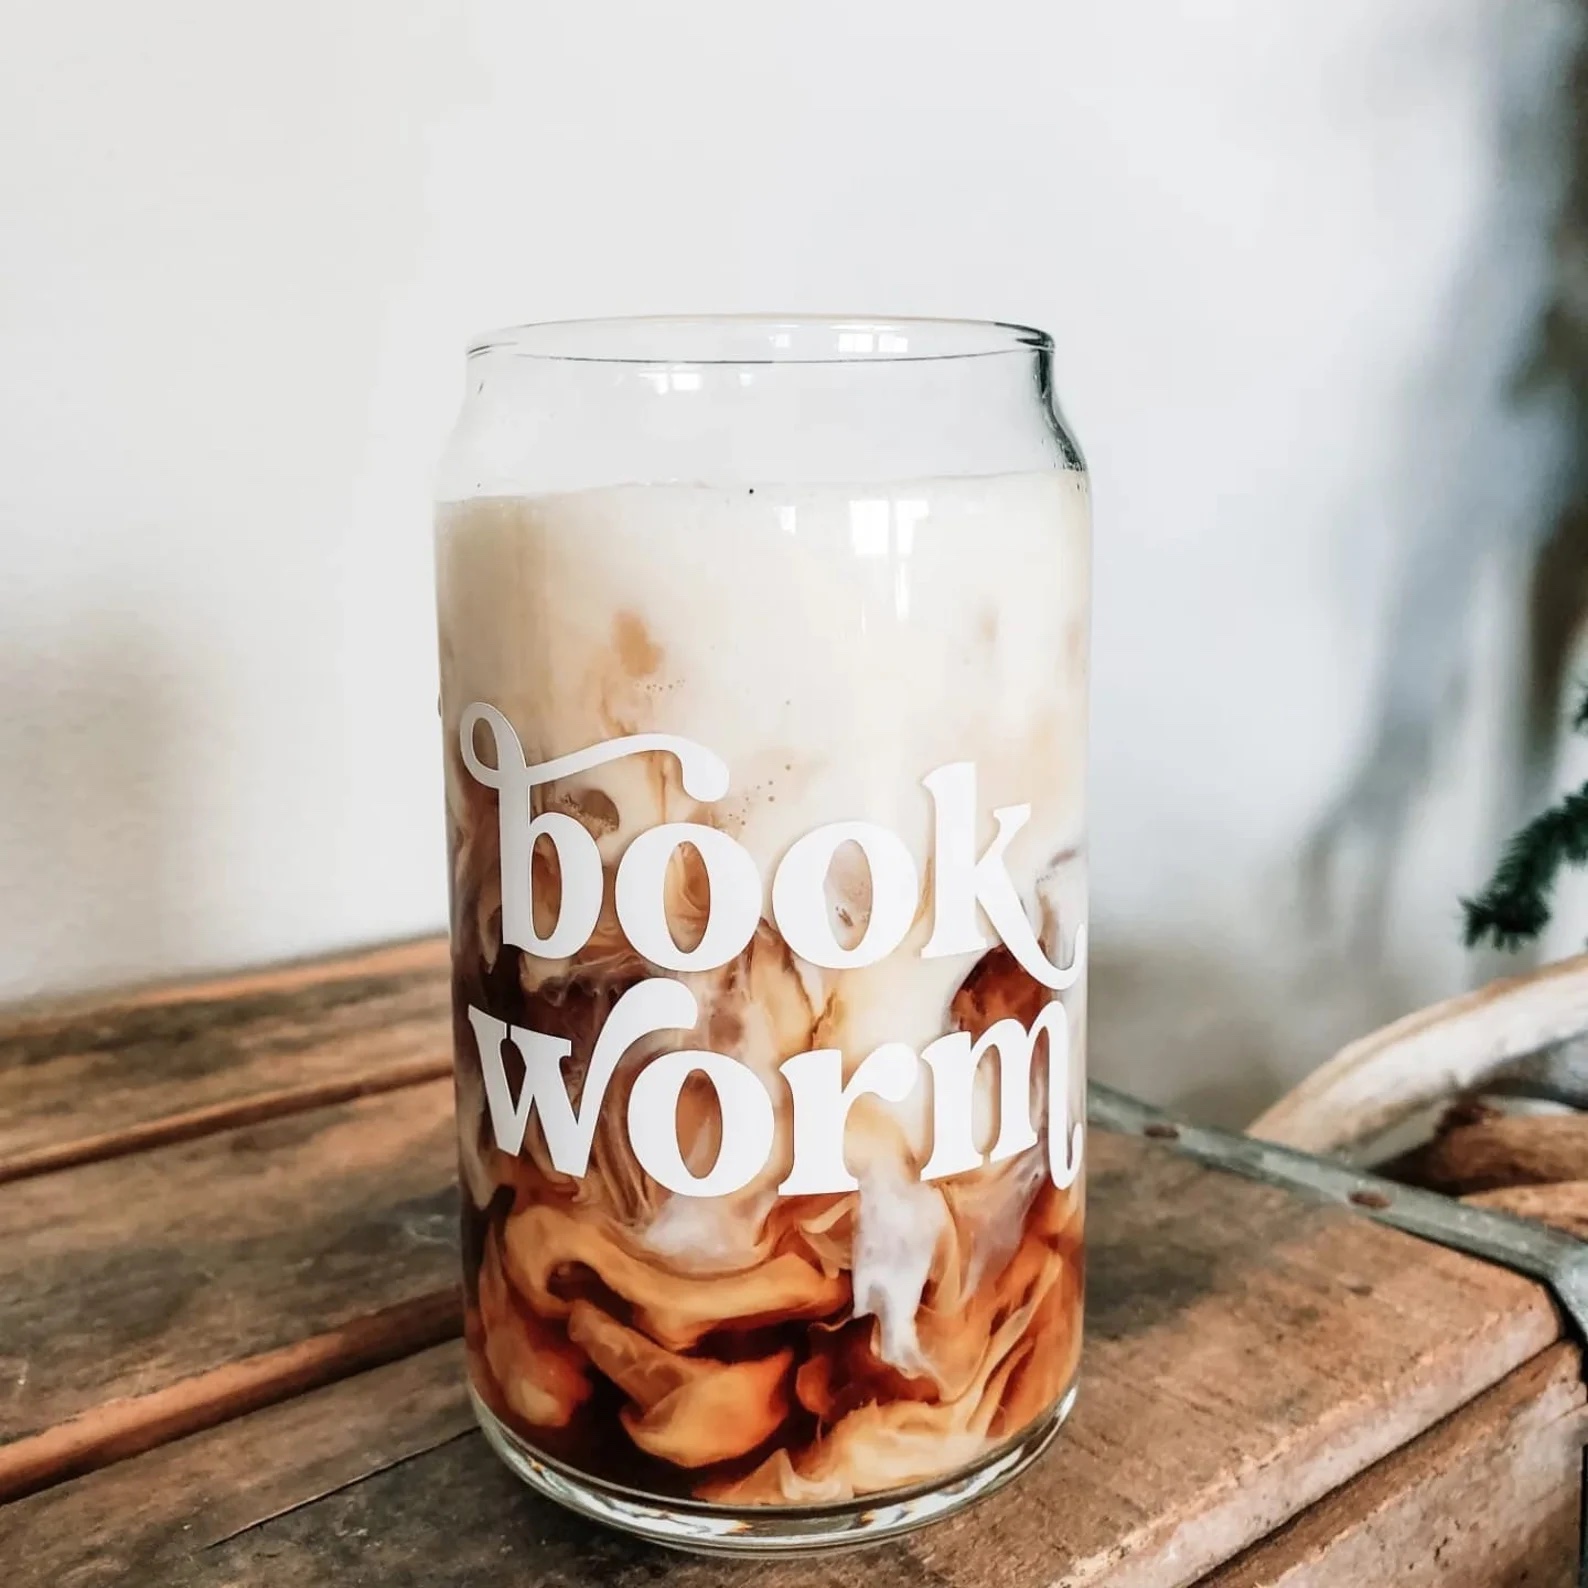 a photo of a tall clear glass with the text "bookworm" in white on the side